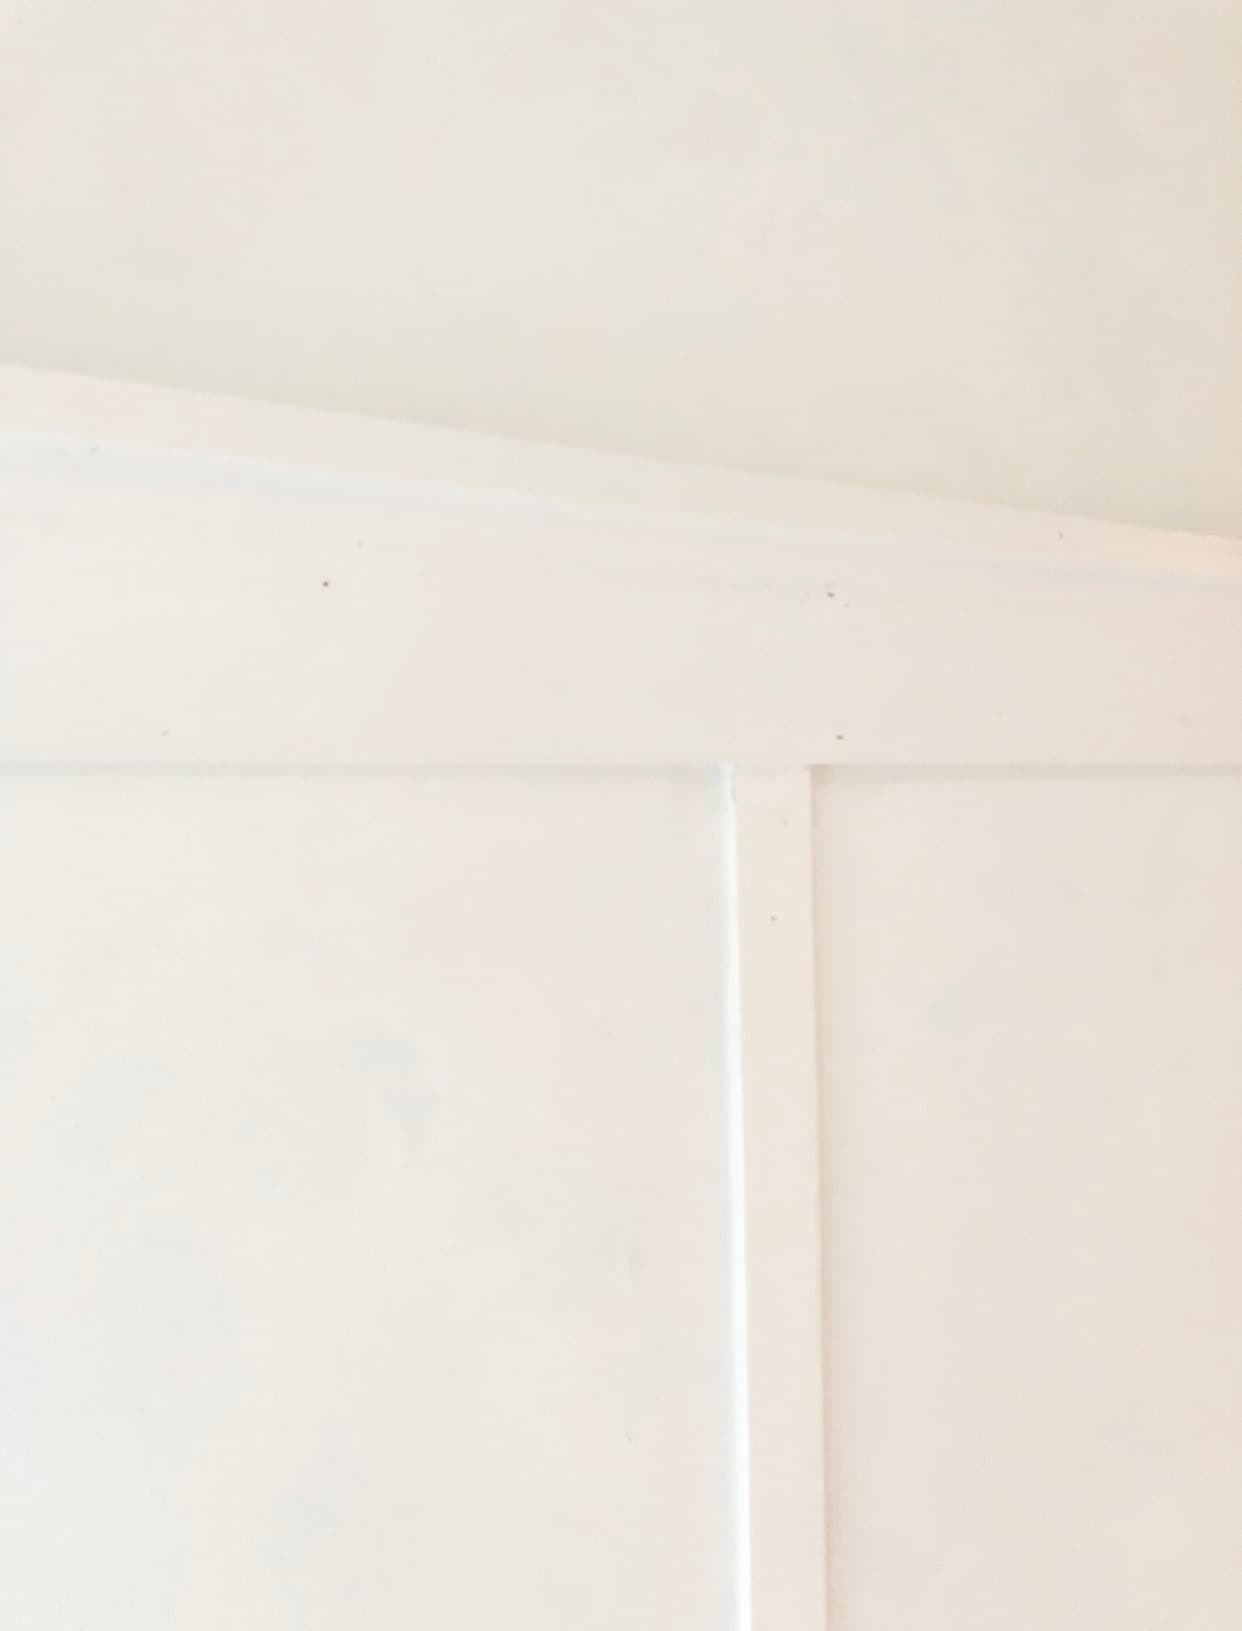 diy country style wainscot trim